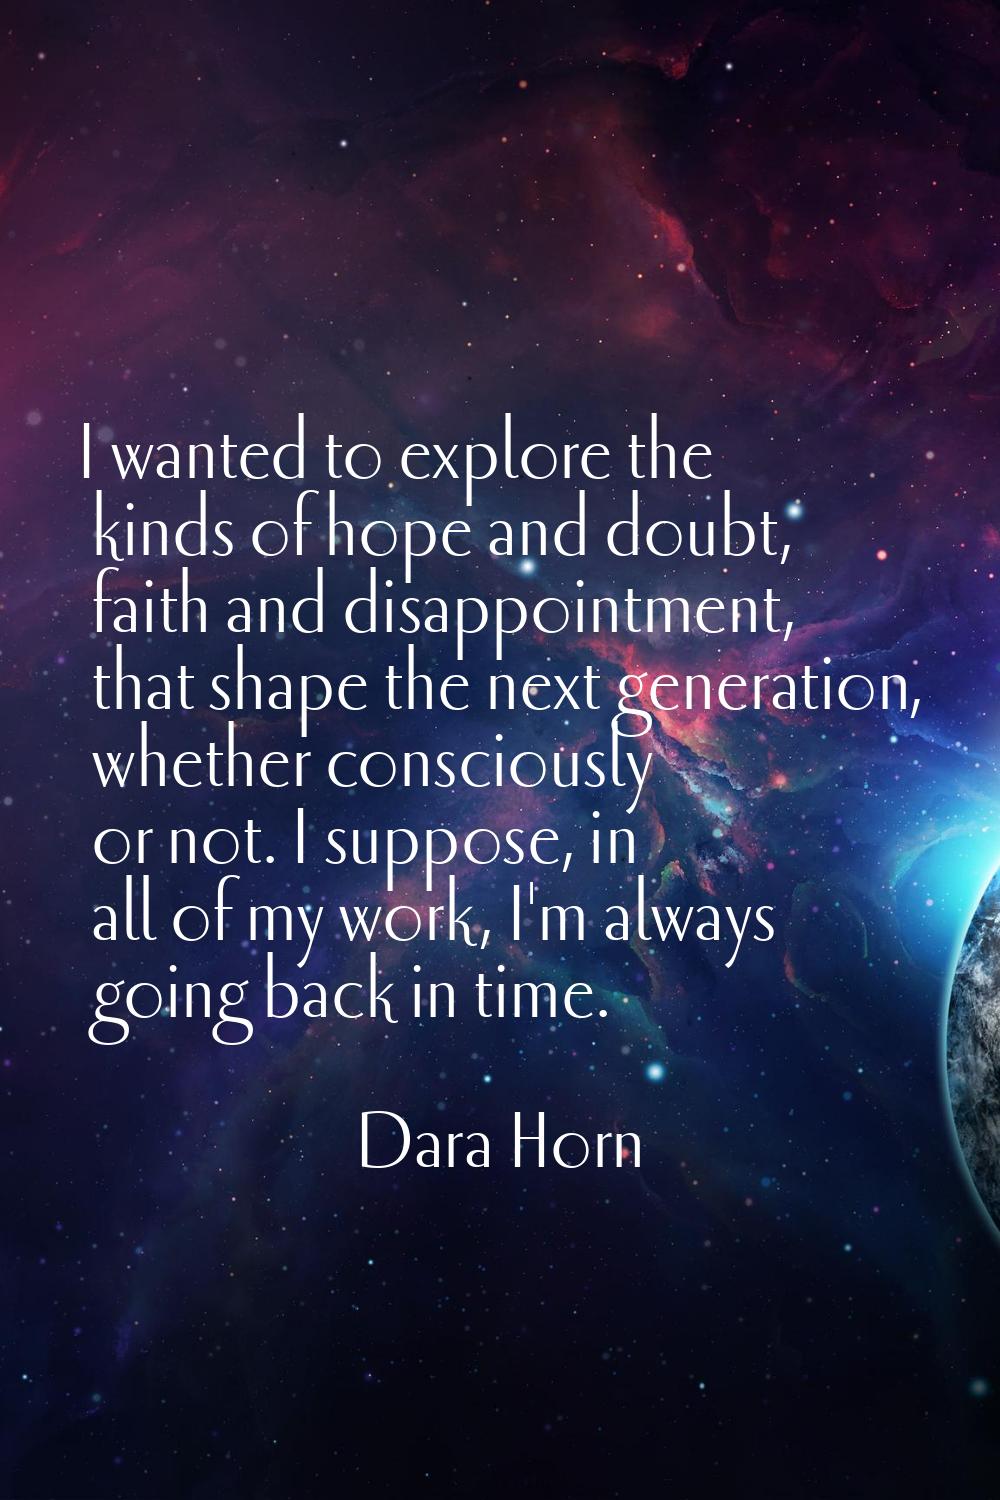 I wanted to explore the kinds of hope and doubt, faith and disappointment, that shape the next gene